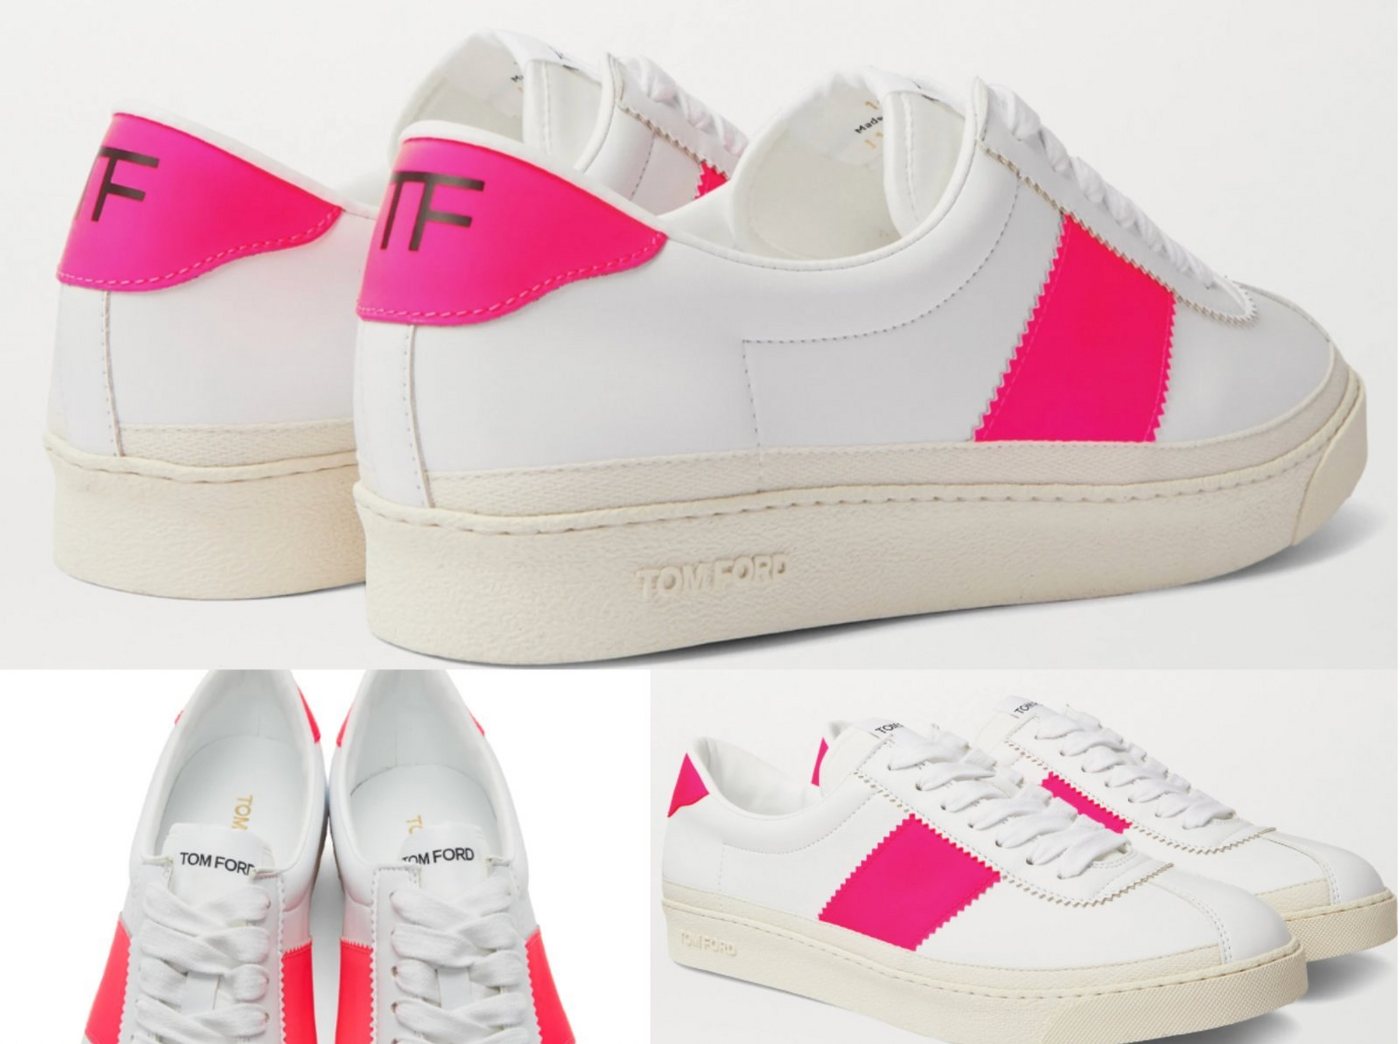 Tom Ford TOM FORD Bannister Pink. Sneakers Schuhe Shoes Trainers Turnschuhe Tra Sneaker von Tom Ford